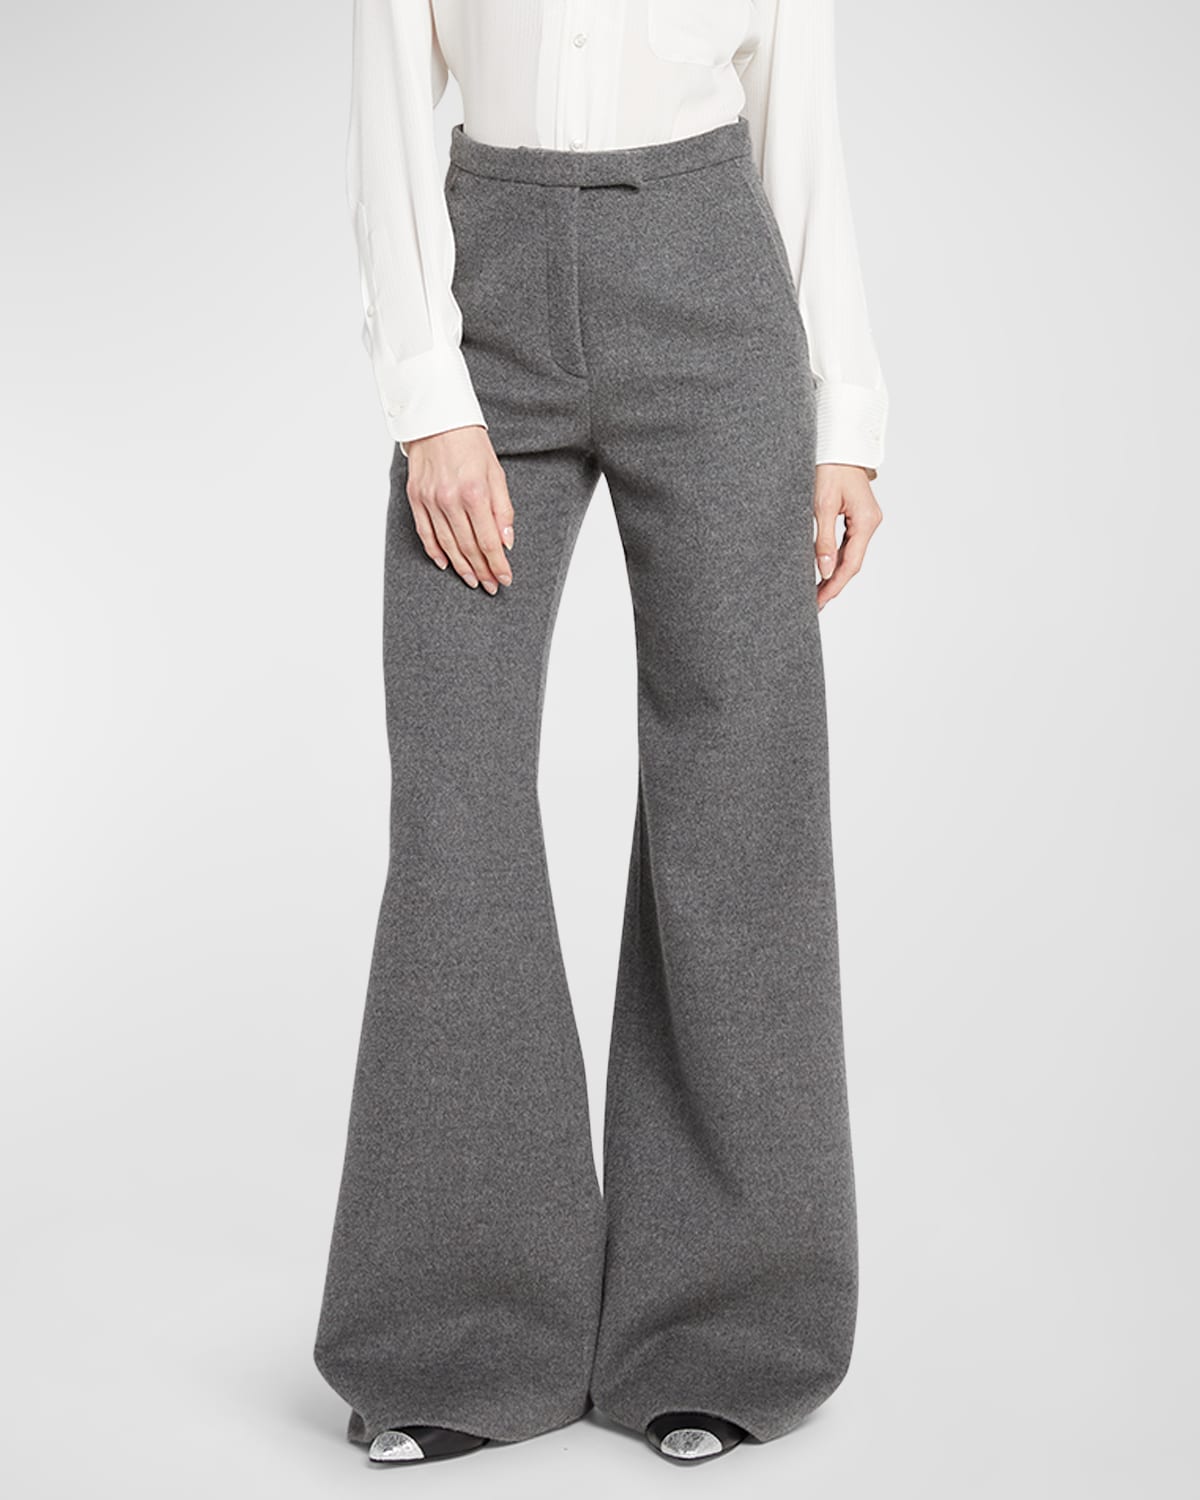 Loro Piana Loy Cashmere Bootcut Trousers In M006 Grey Melange